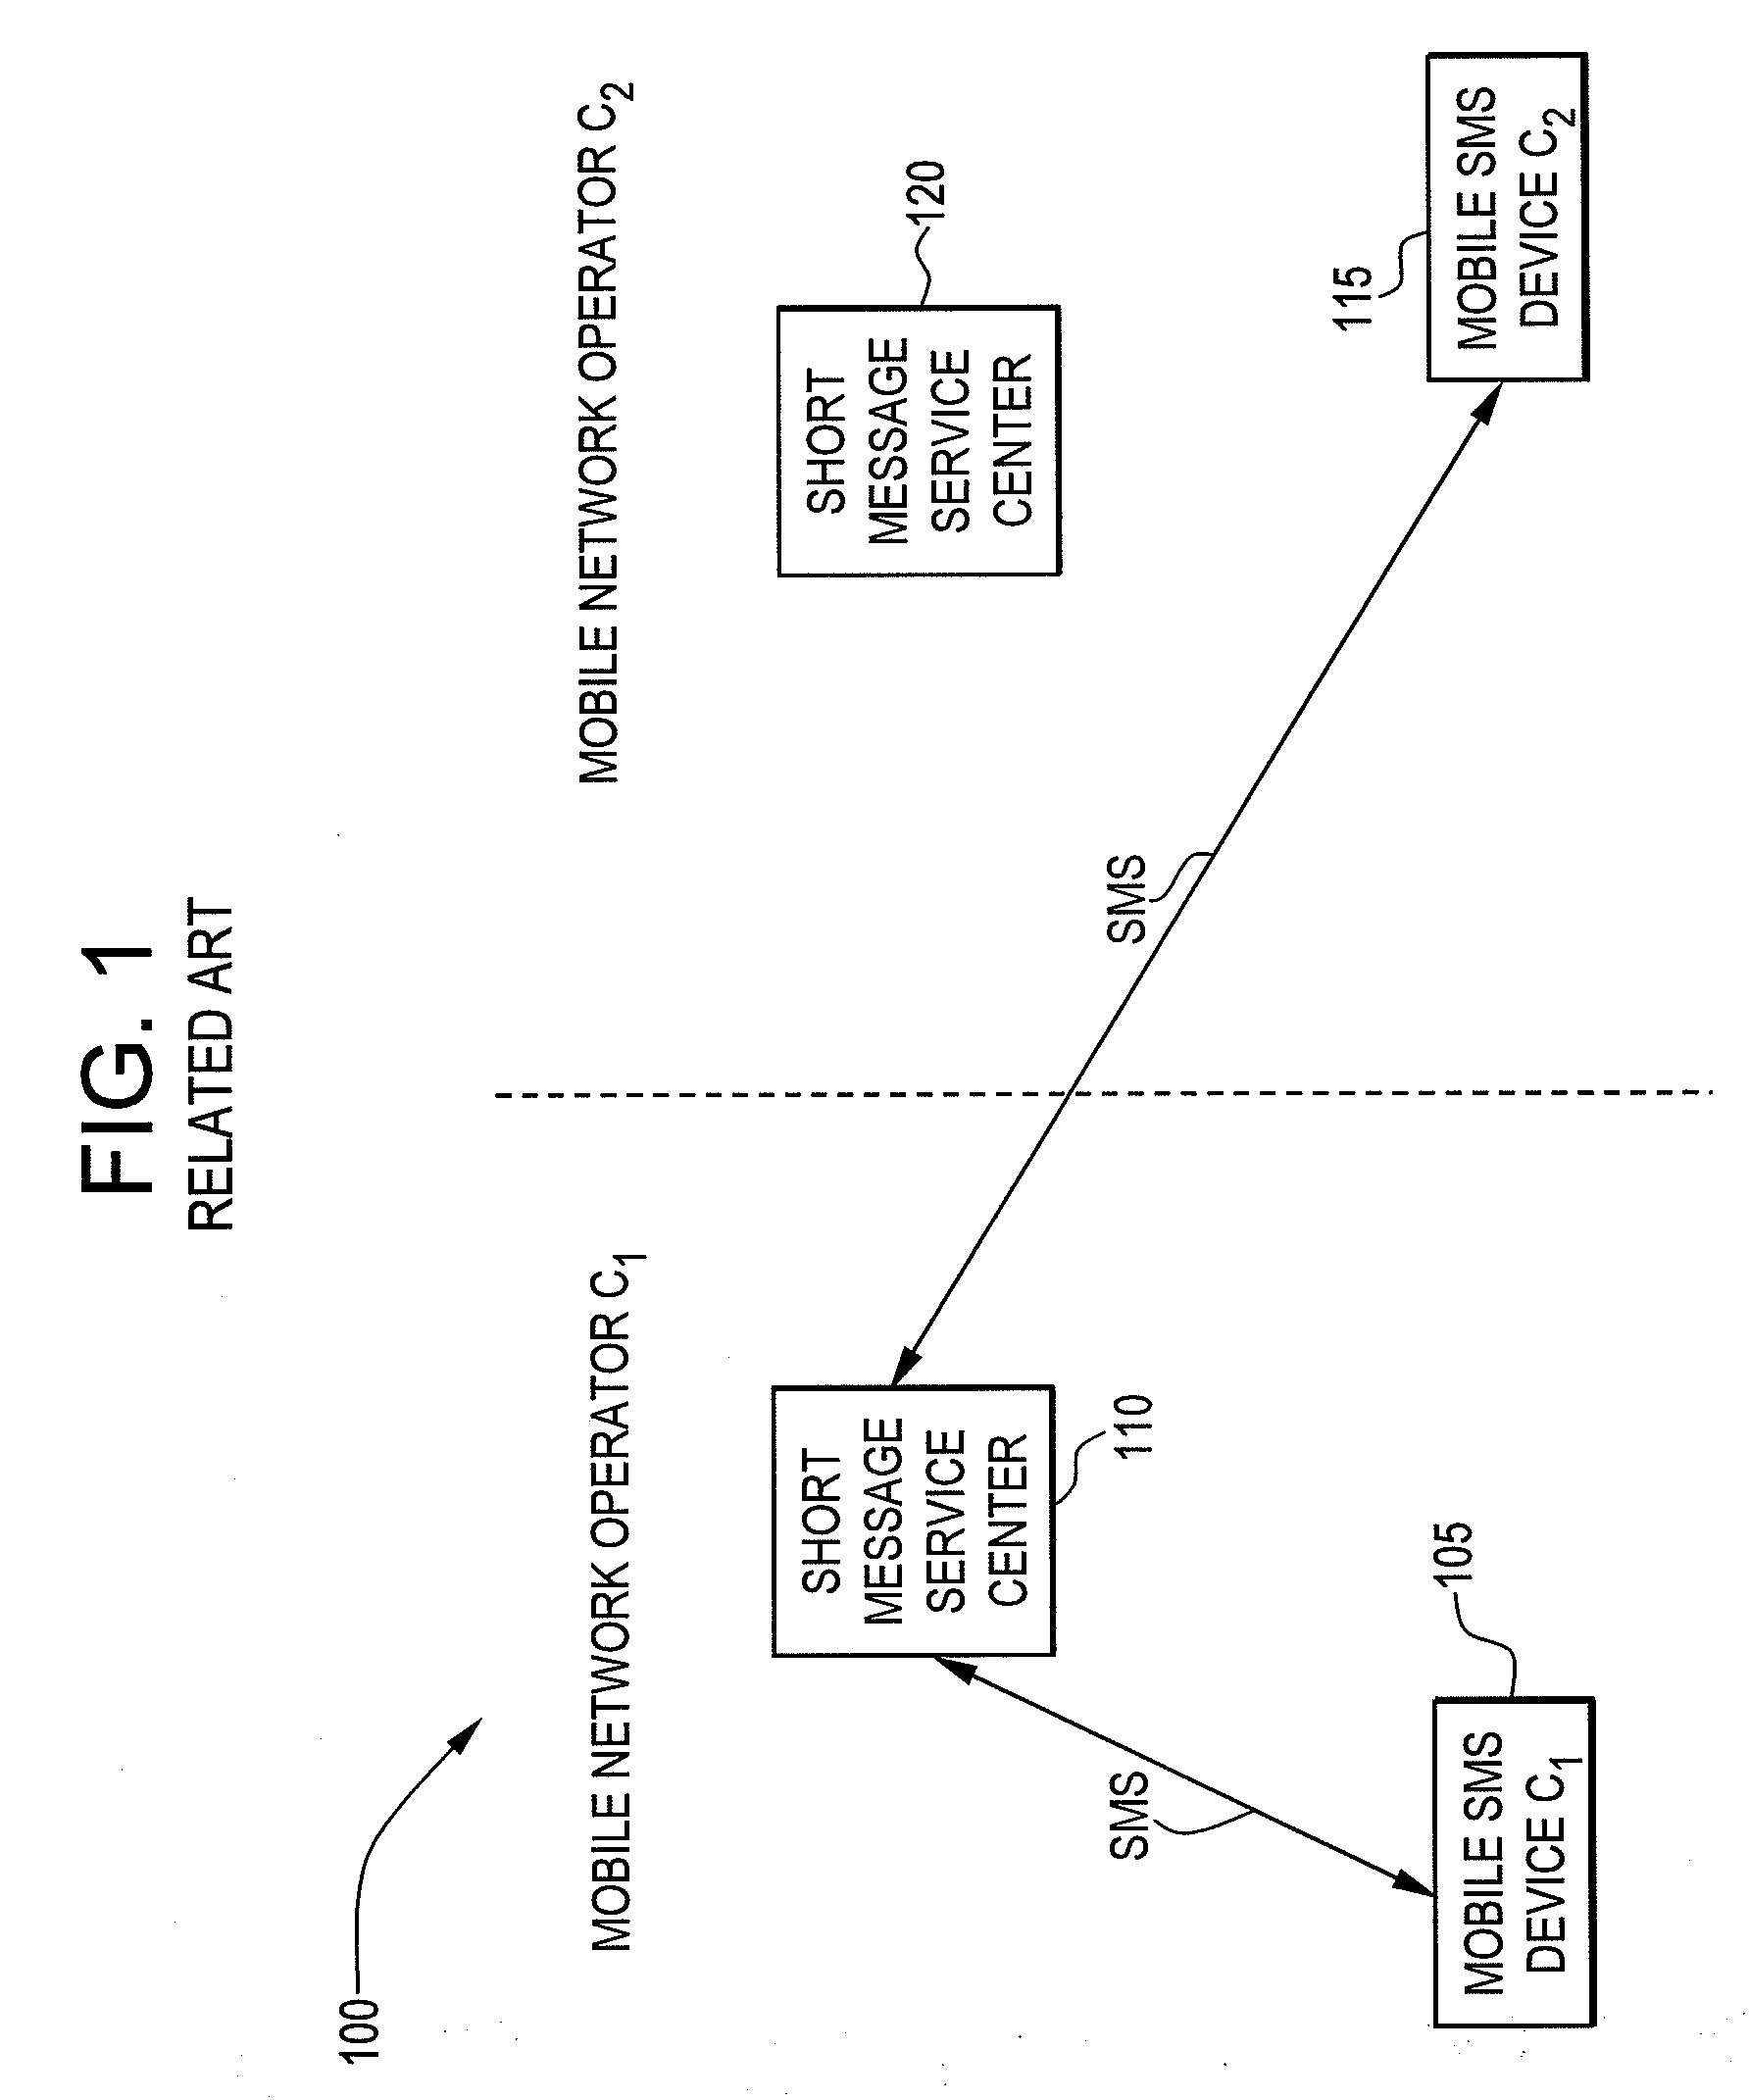 System and method for short message service and instant messaging continuity